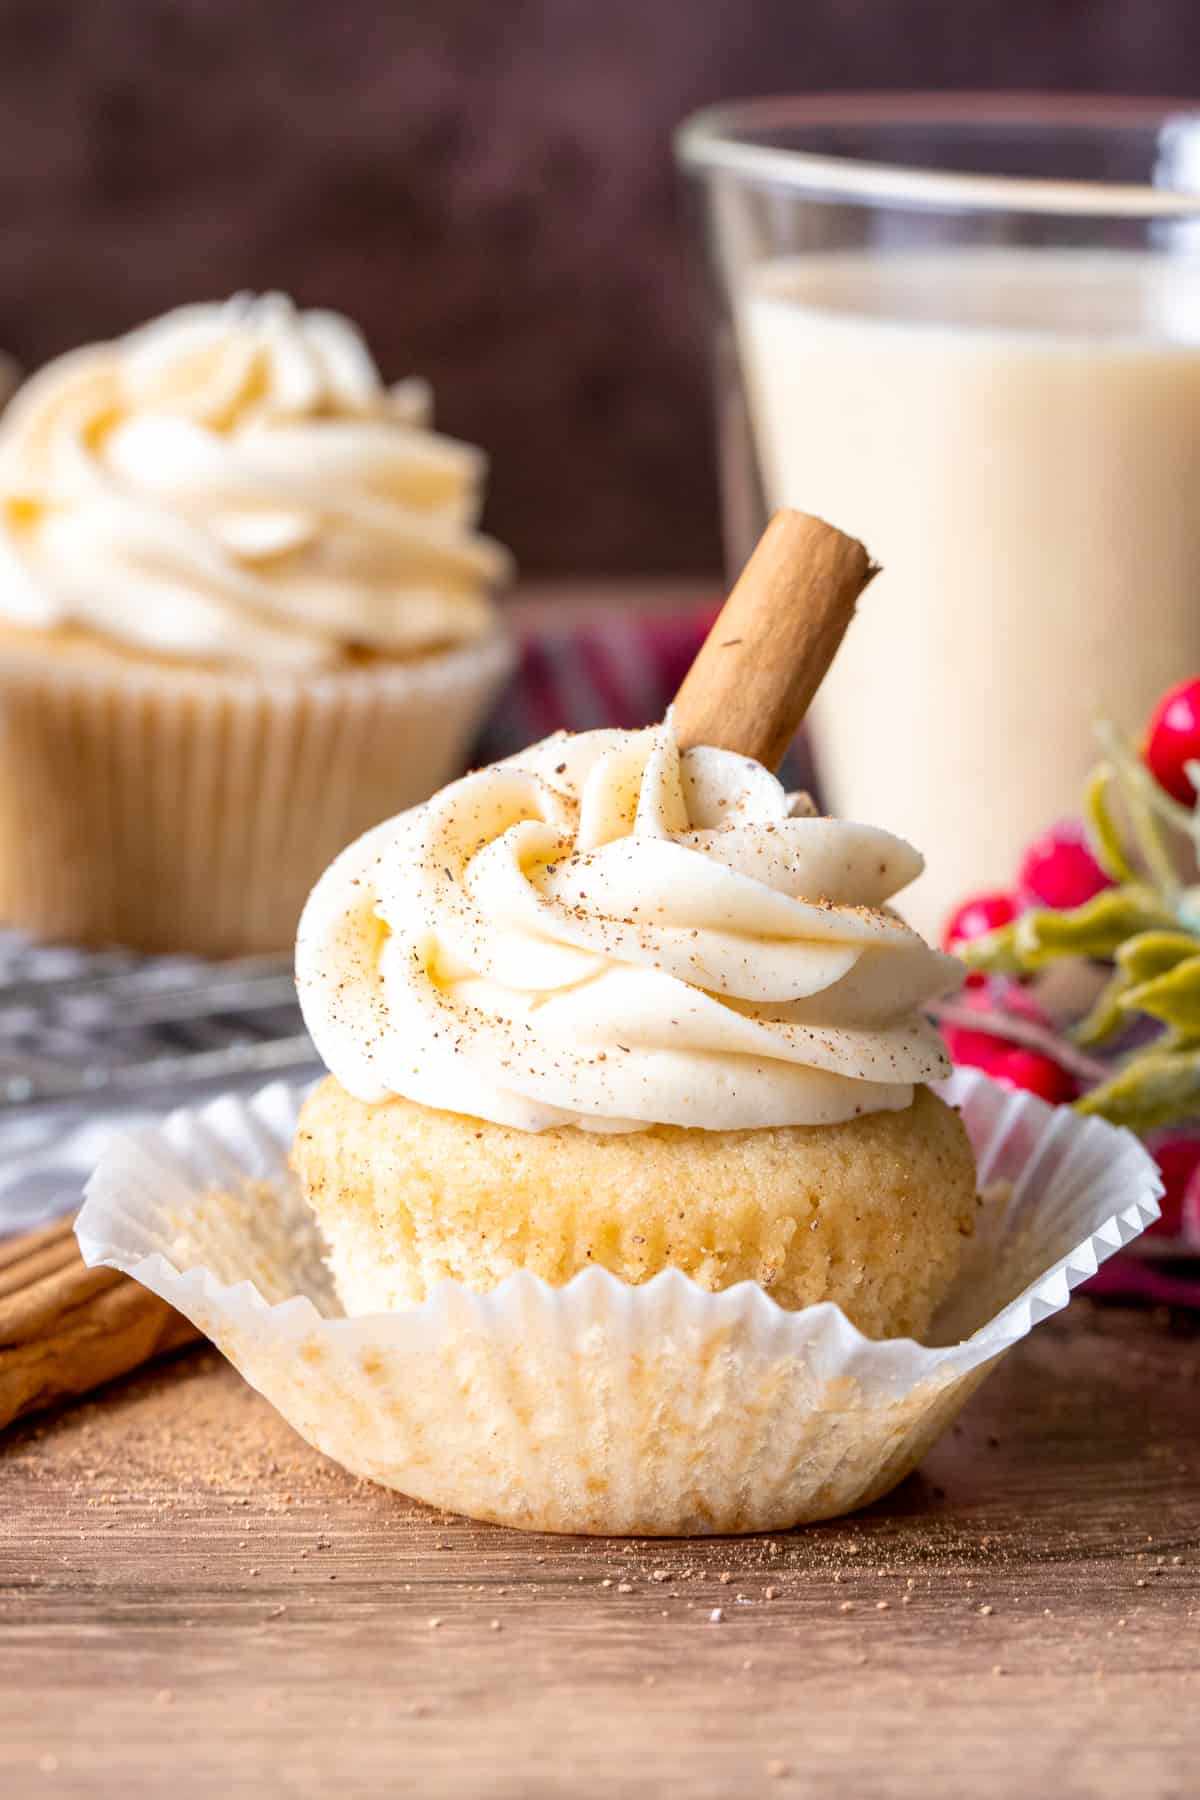 Frosted cupcake with cupcake peeled back